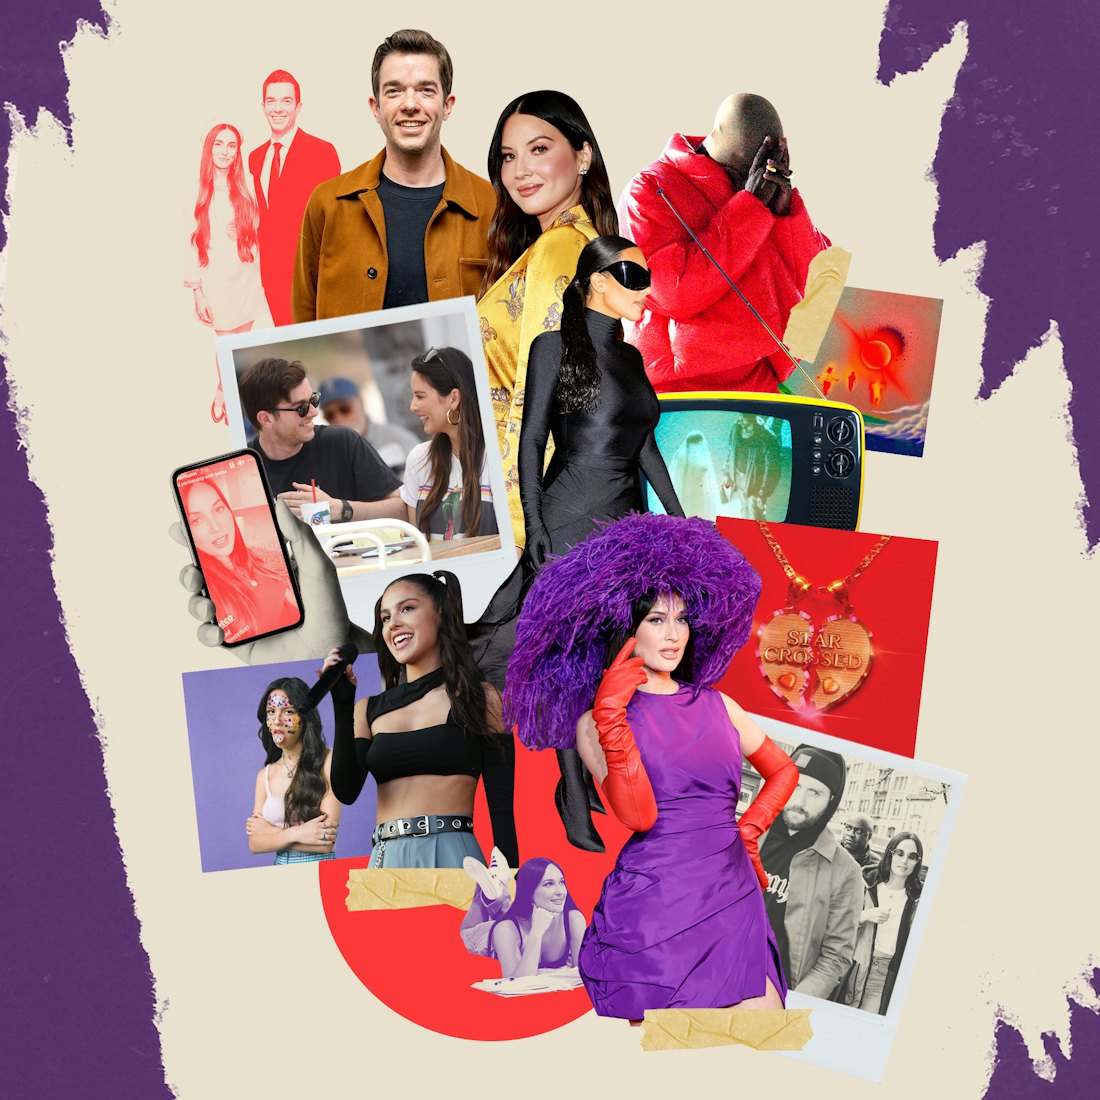 Between albums from Olivia Rodrigo and Kacey Musgraves, and the aftermath of John Mulaney's split wi...